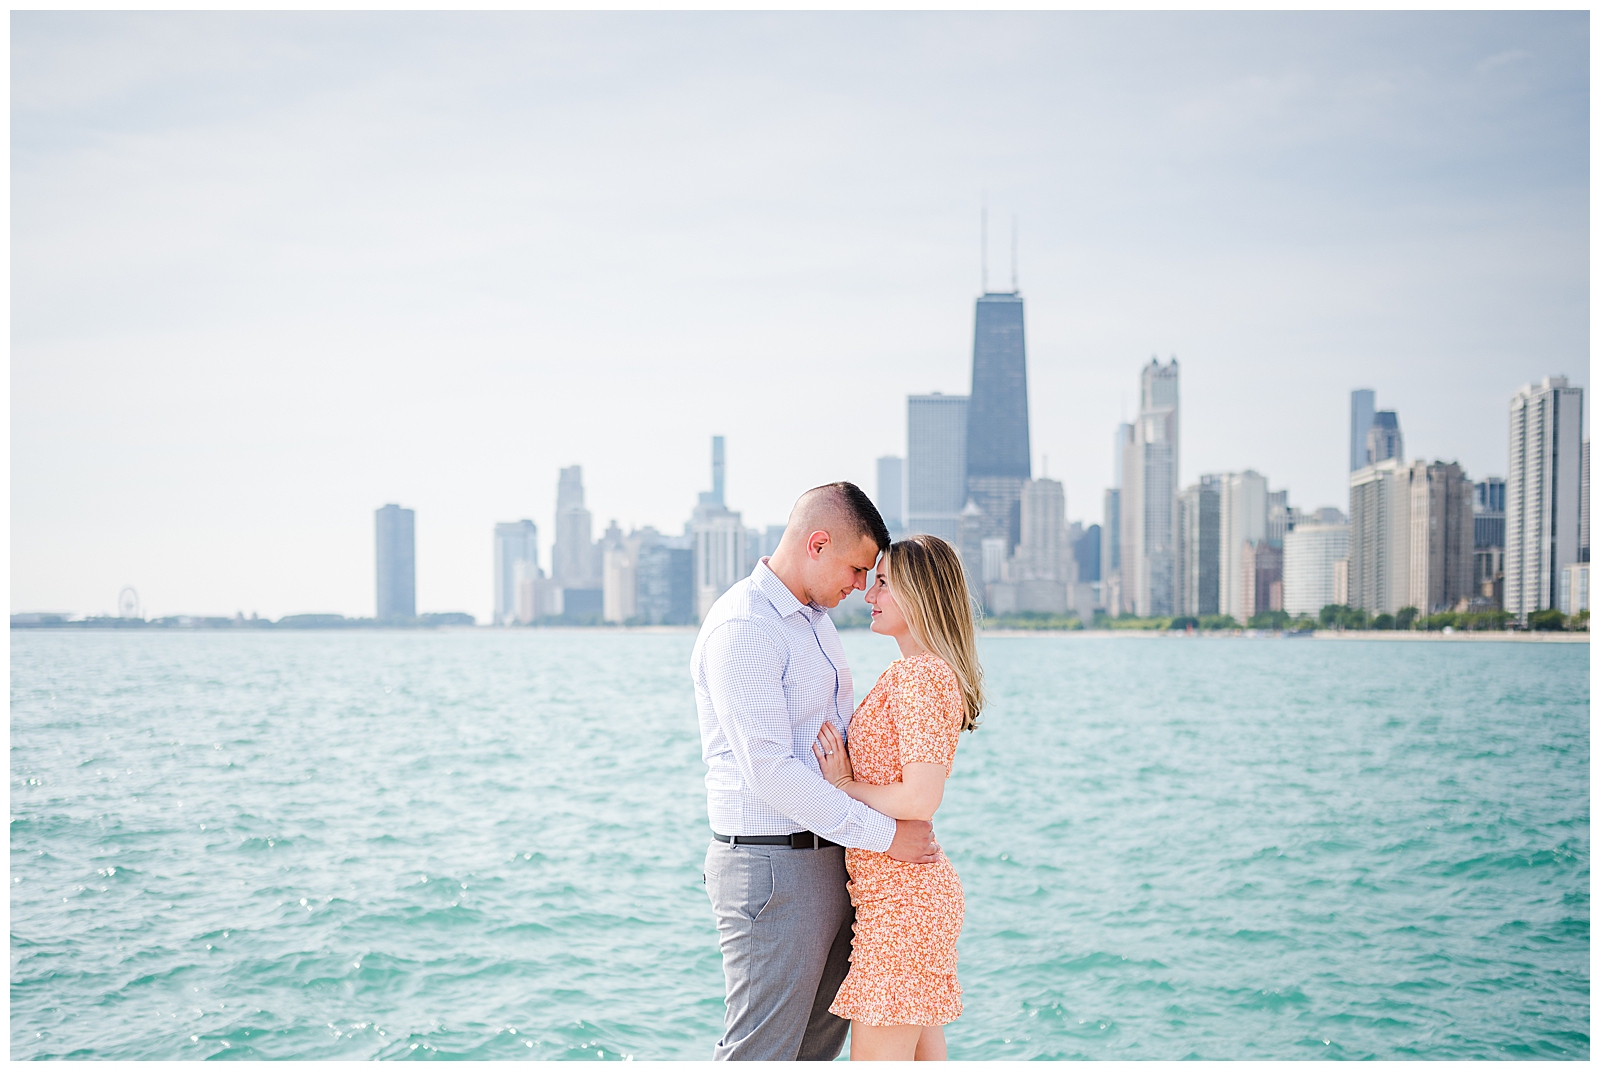 Engagement session at North Ave beach overlooking the Chicago skyline and Lake Michigan.